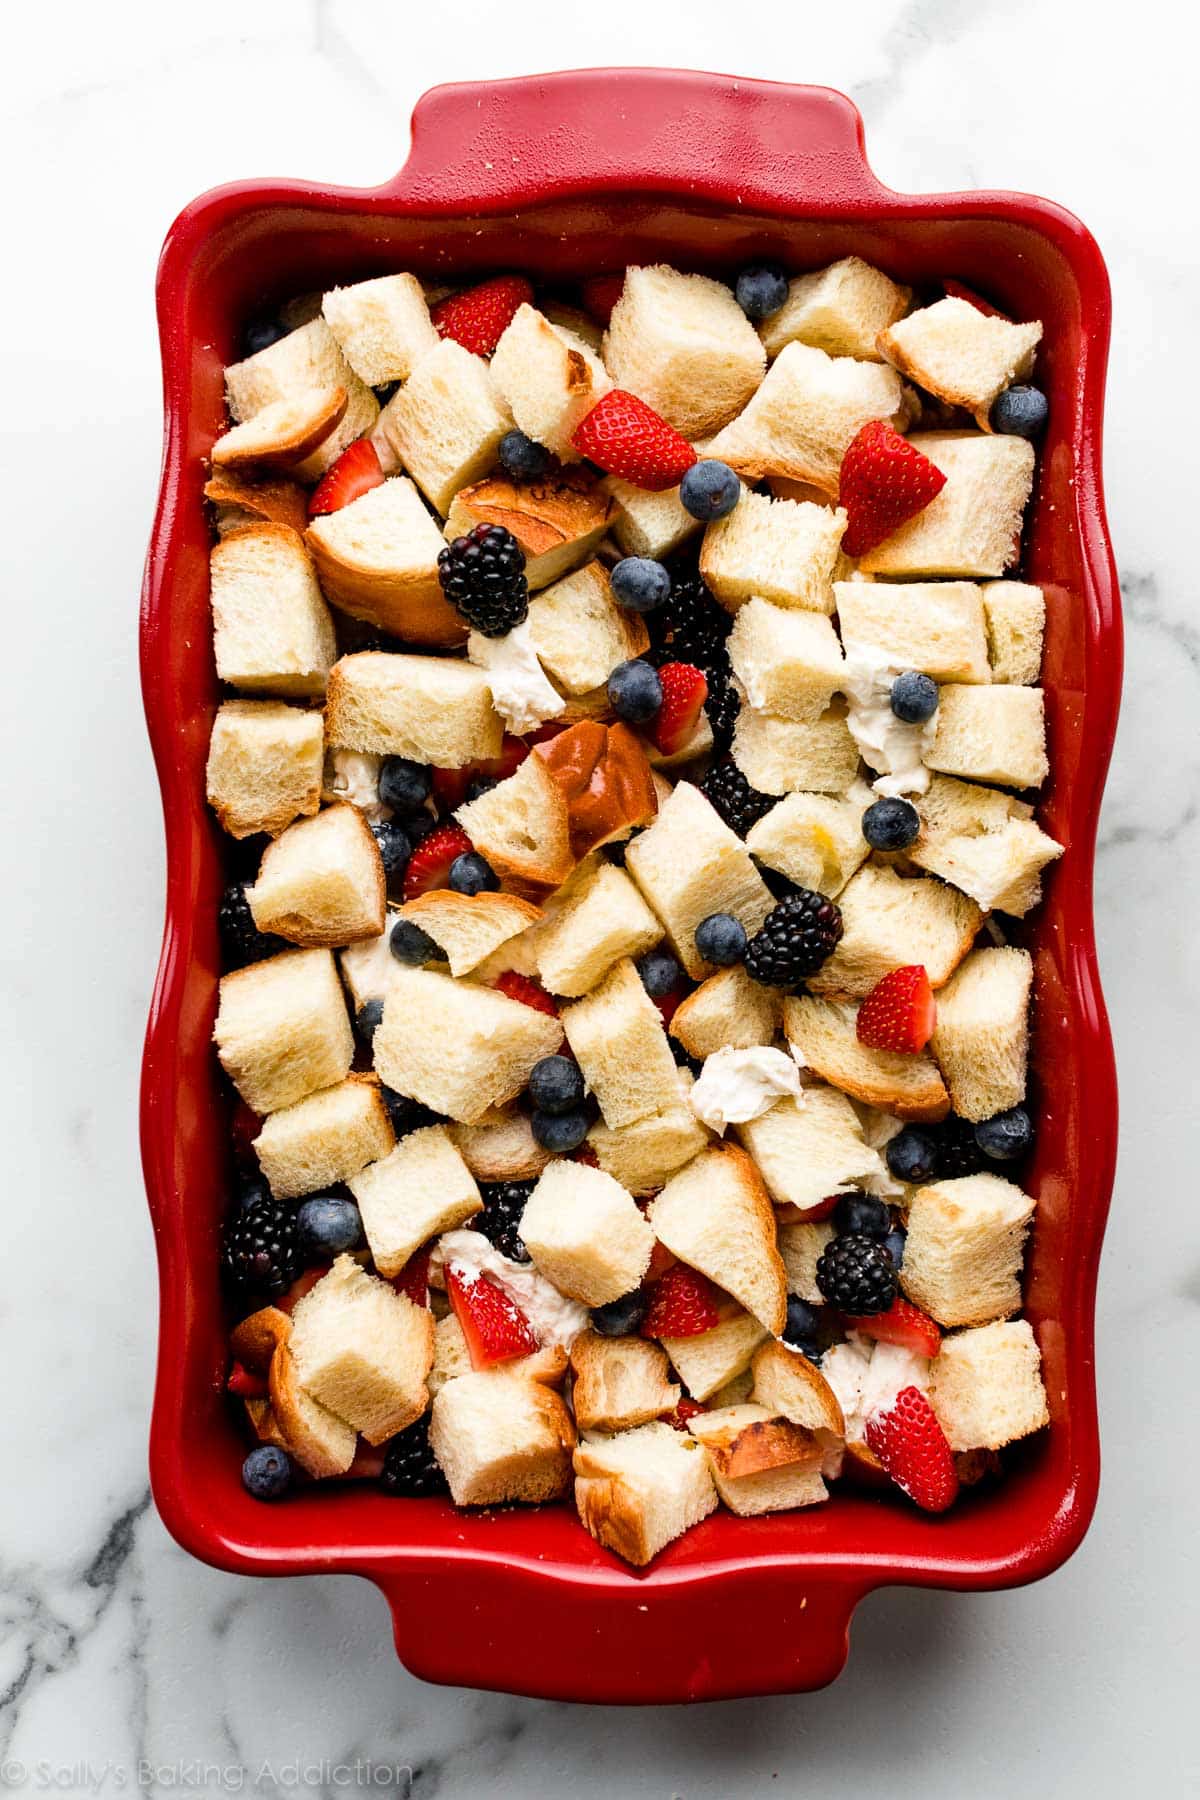 French toast with berries in a red casserole before baking